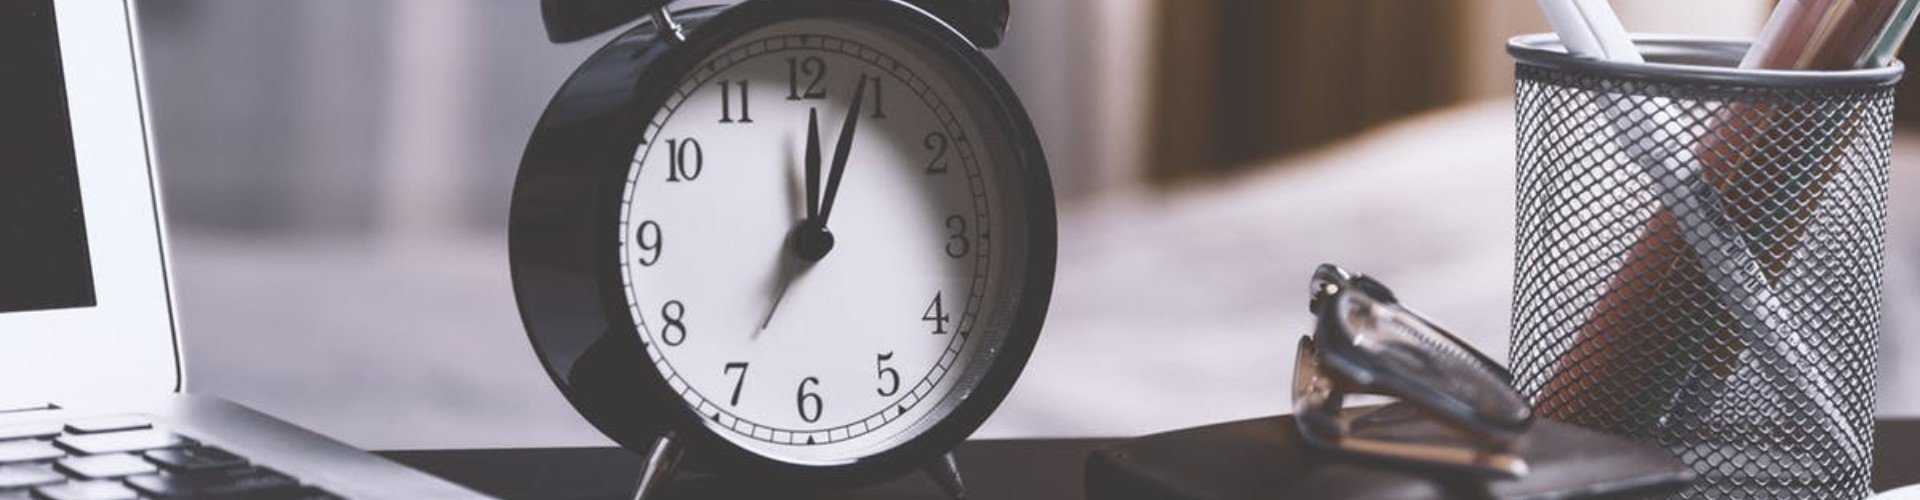 Ways managers can help solve employee time management issues